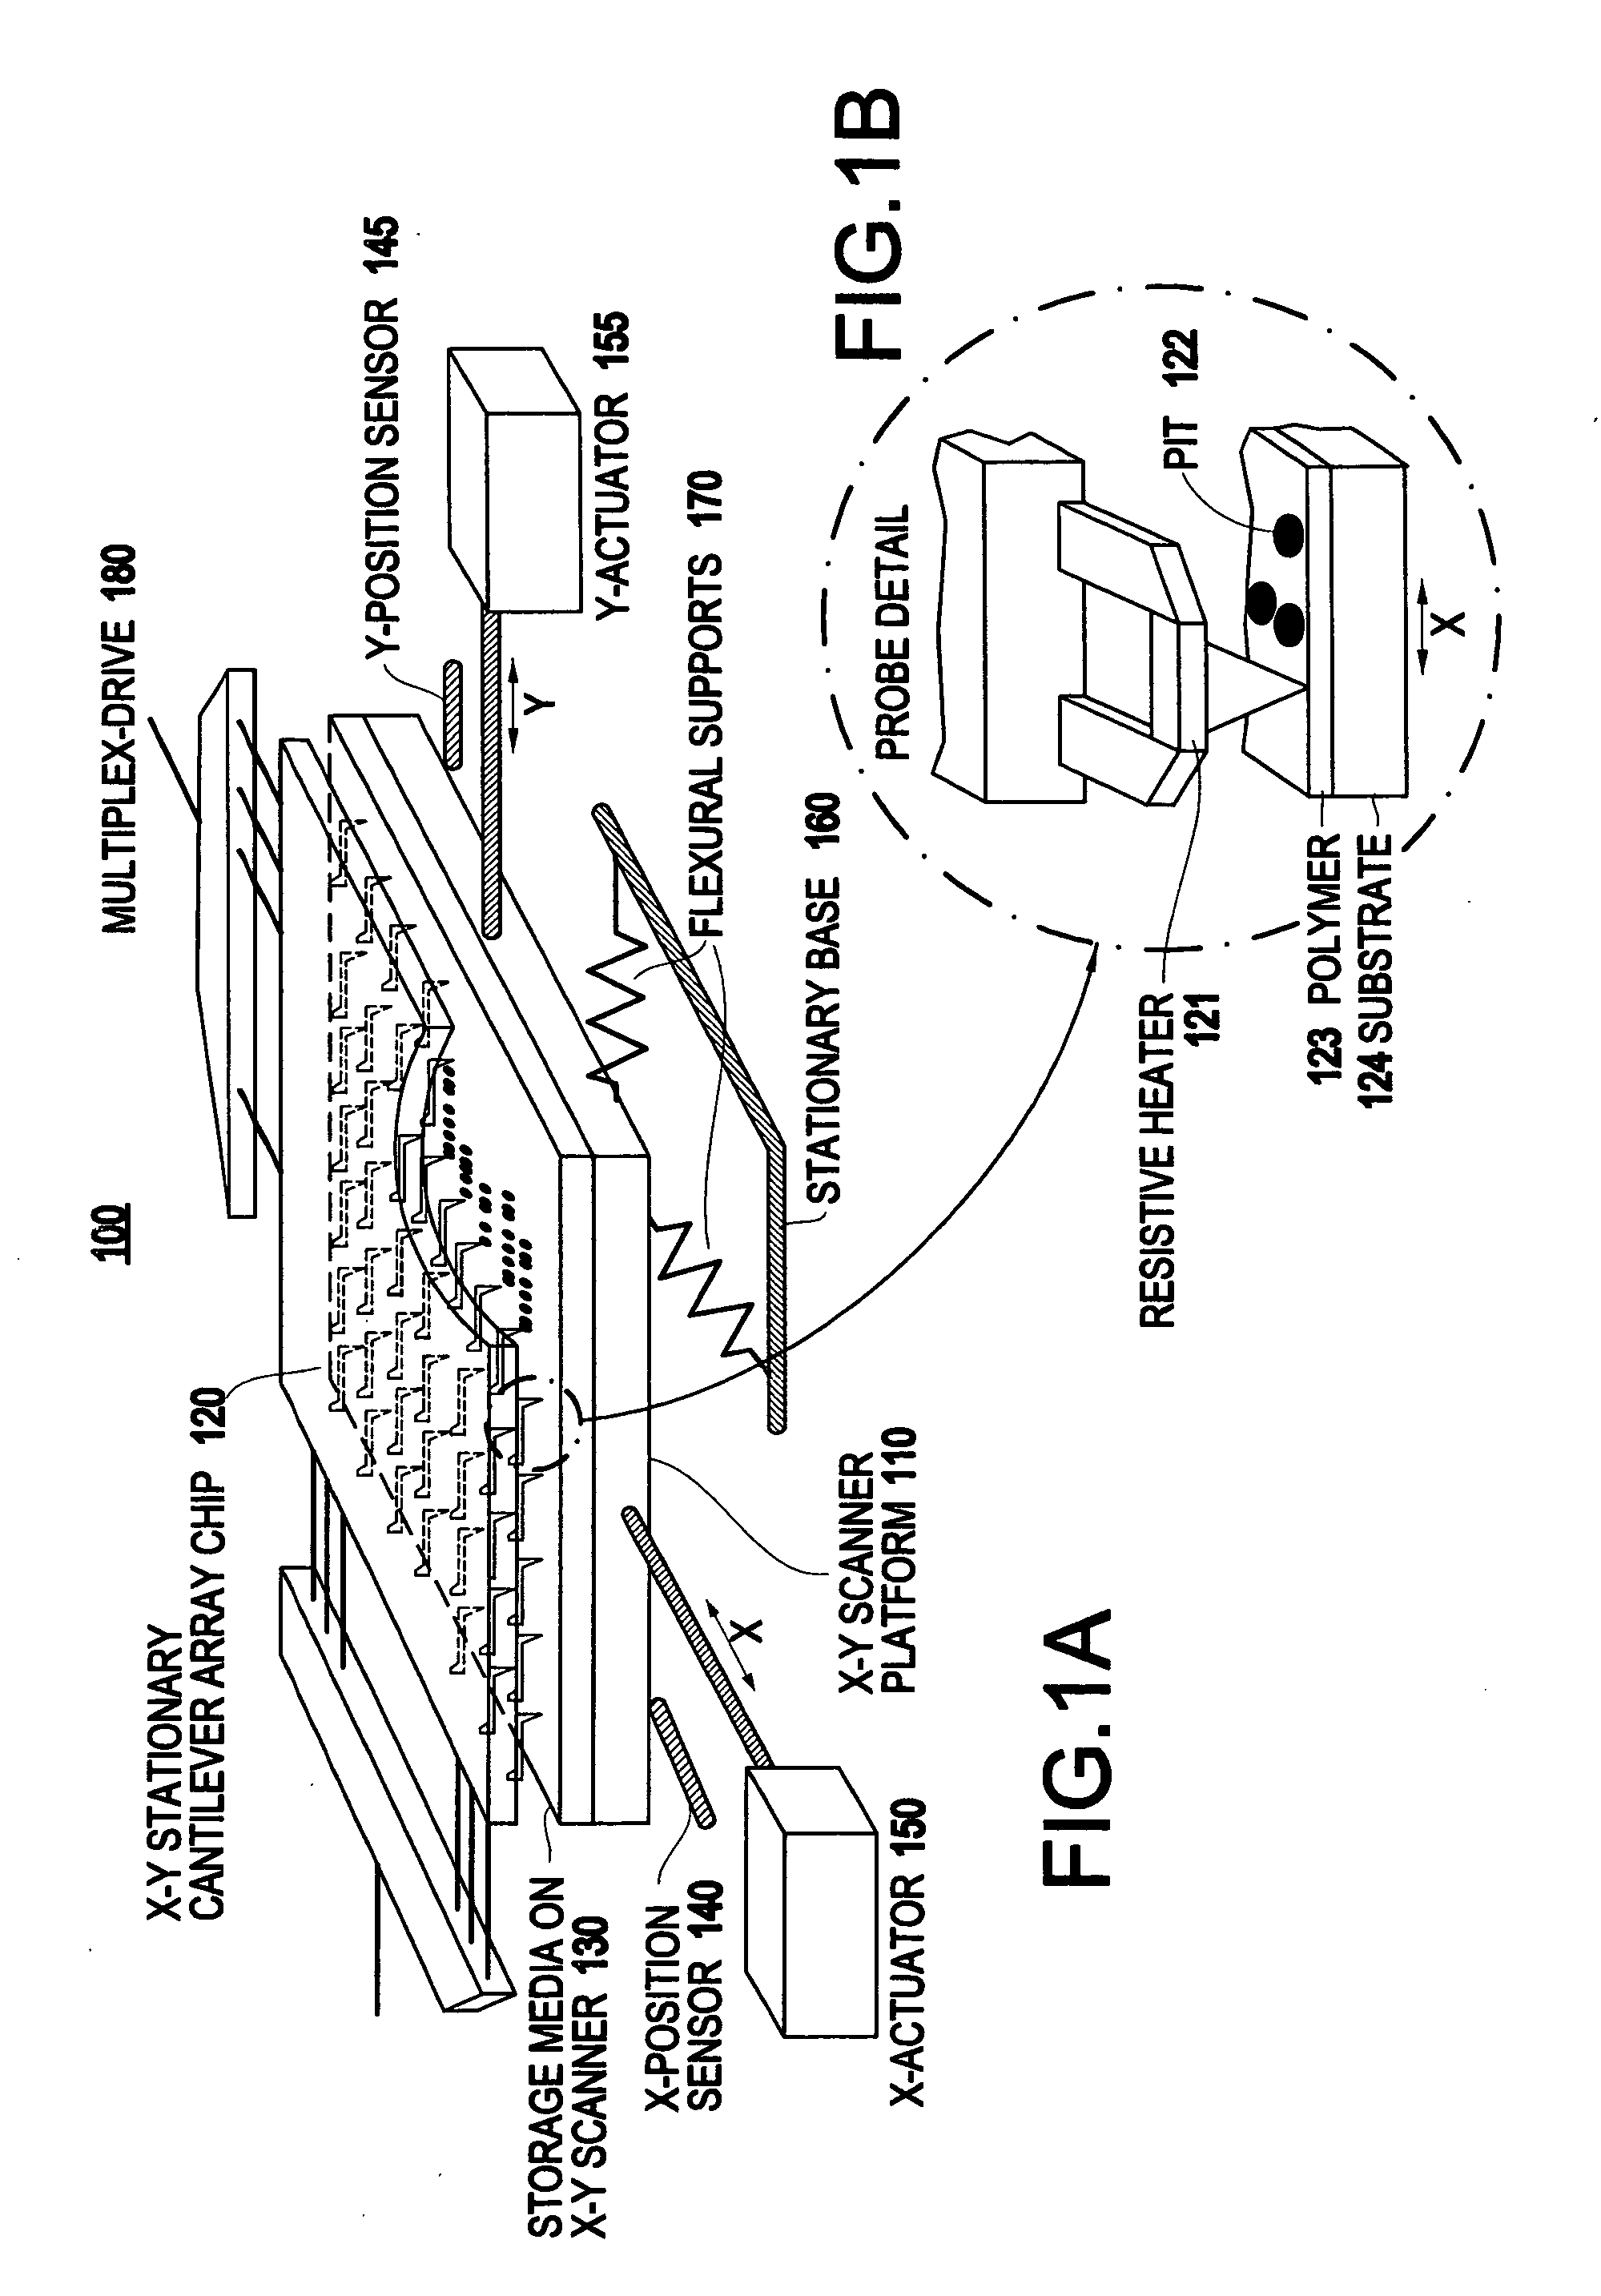 Servo system for a two-dimensional micro-electromechanical system (MEMS)-based scanner and method therefor